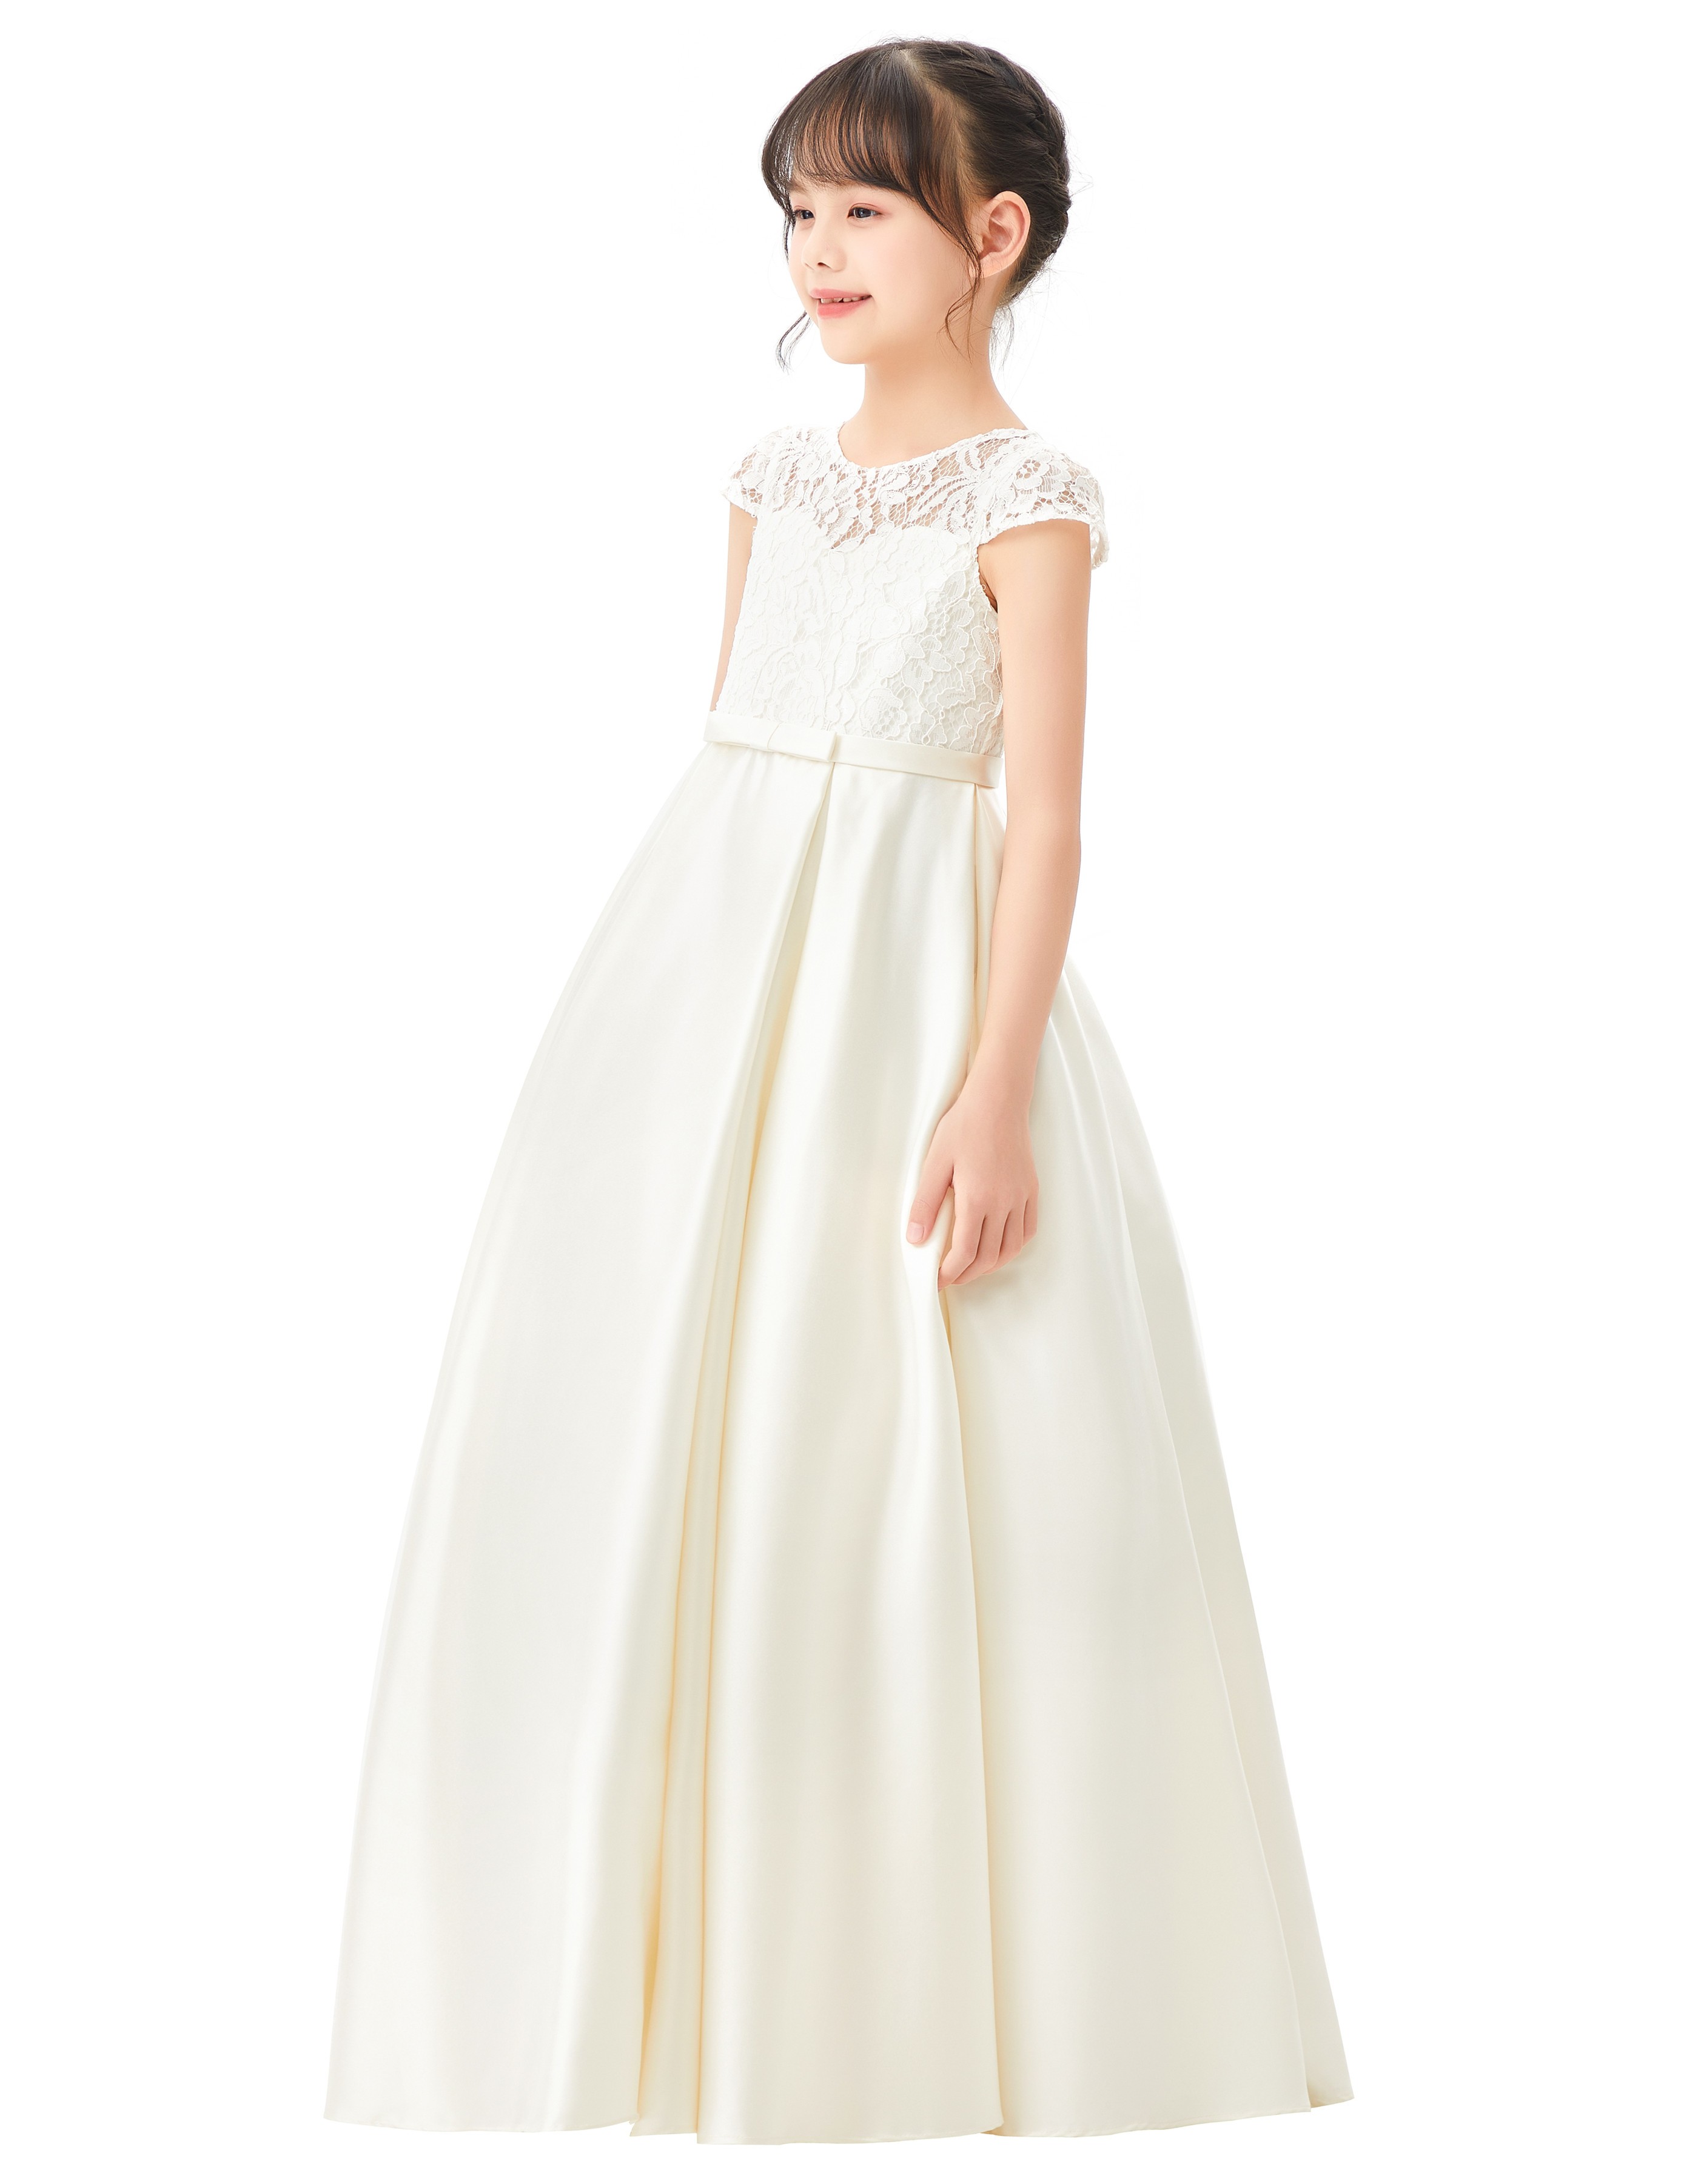 Ivory Lace Flower Girl Dress Illusion Lace Dress Cap Sleeves L246